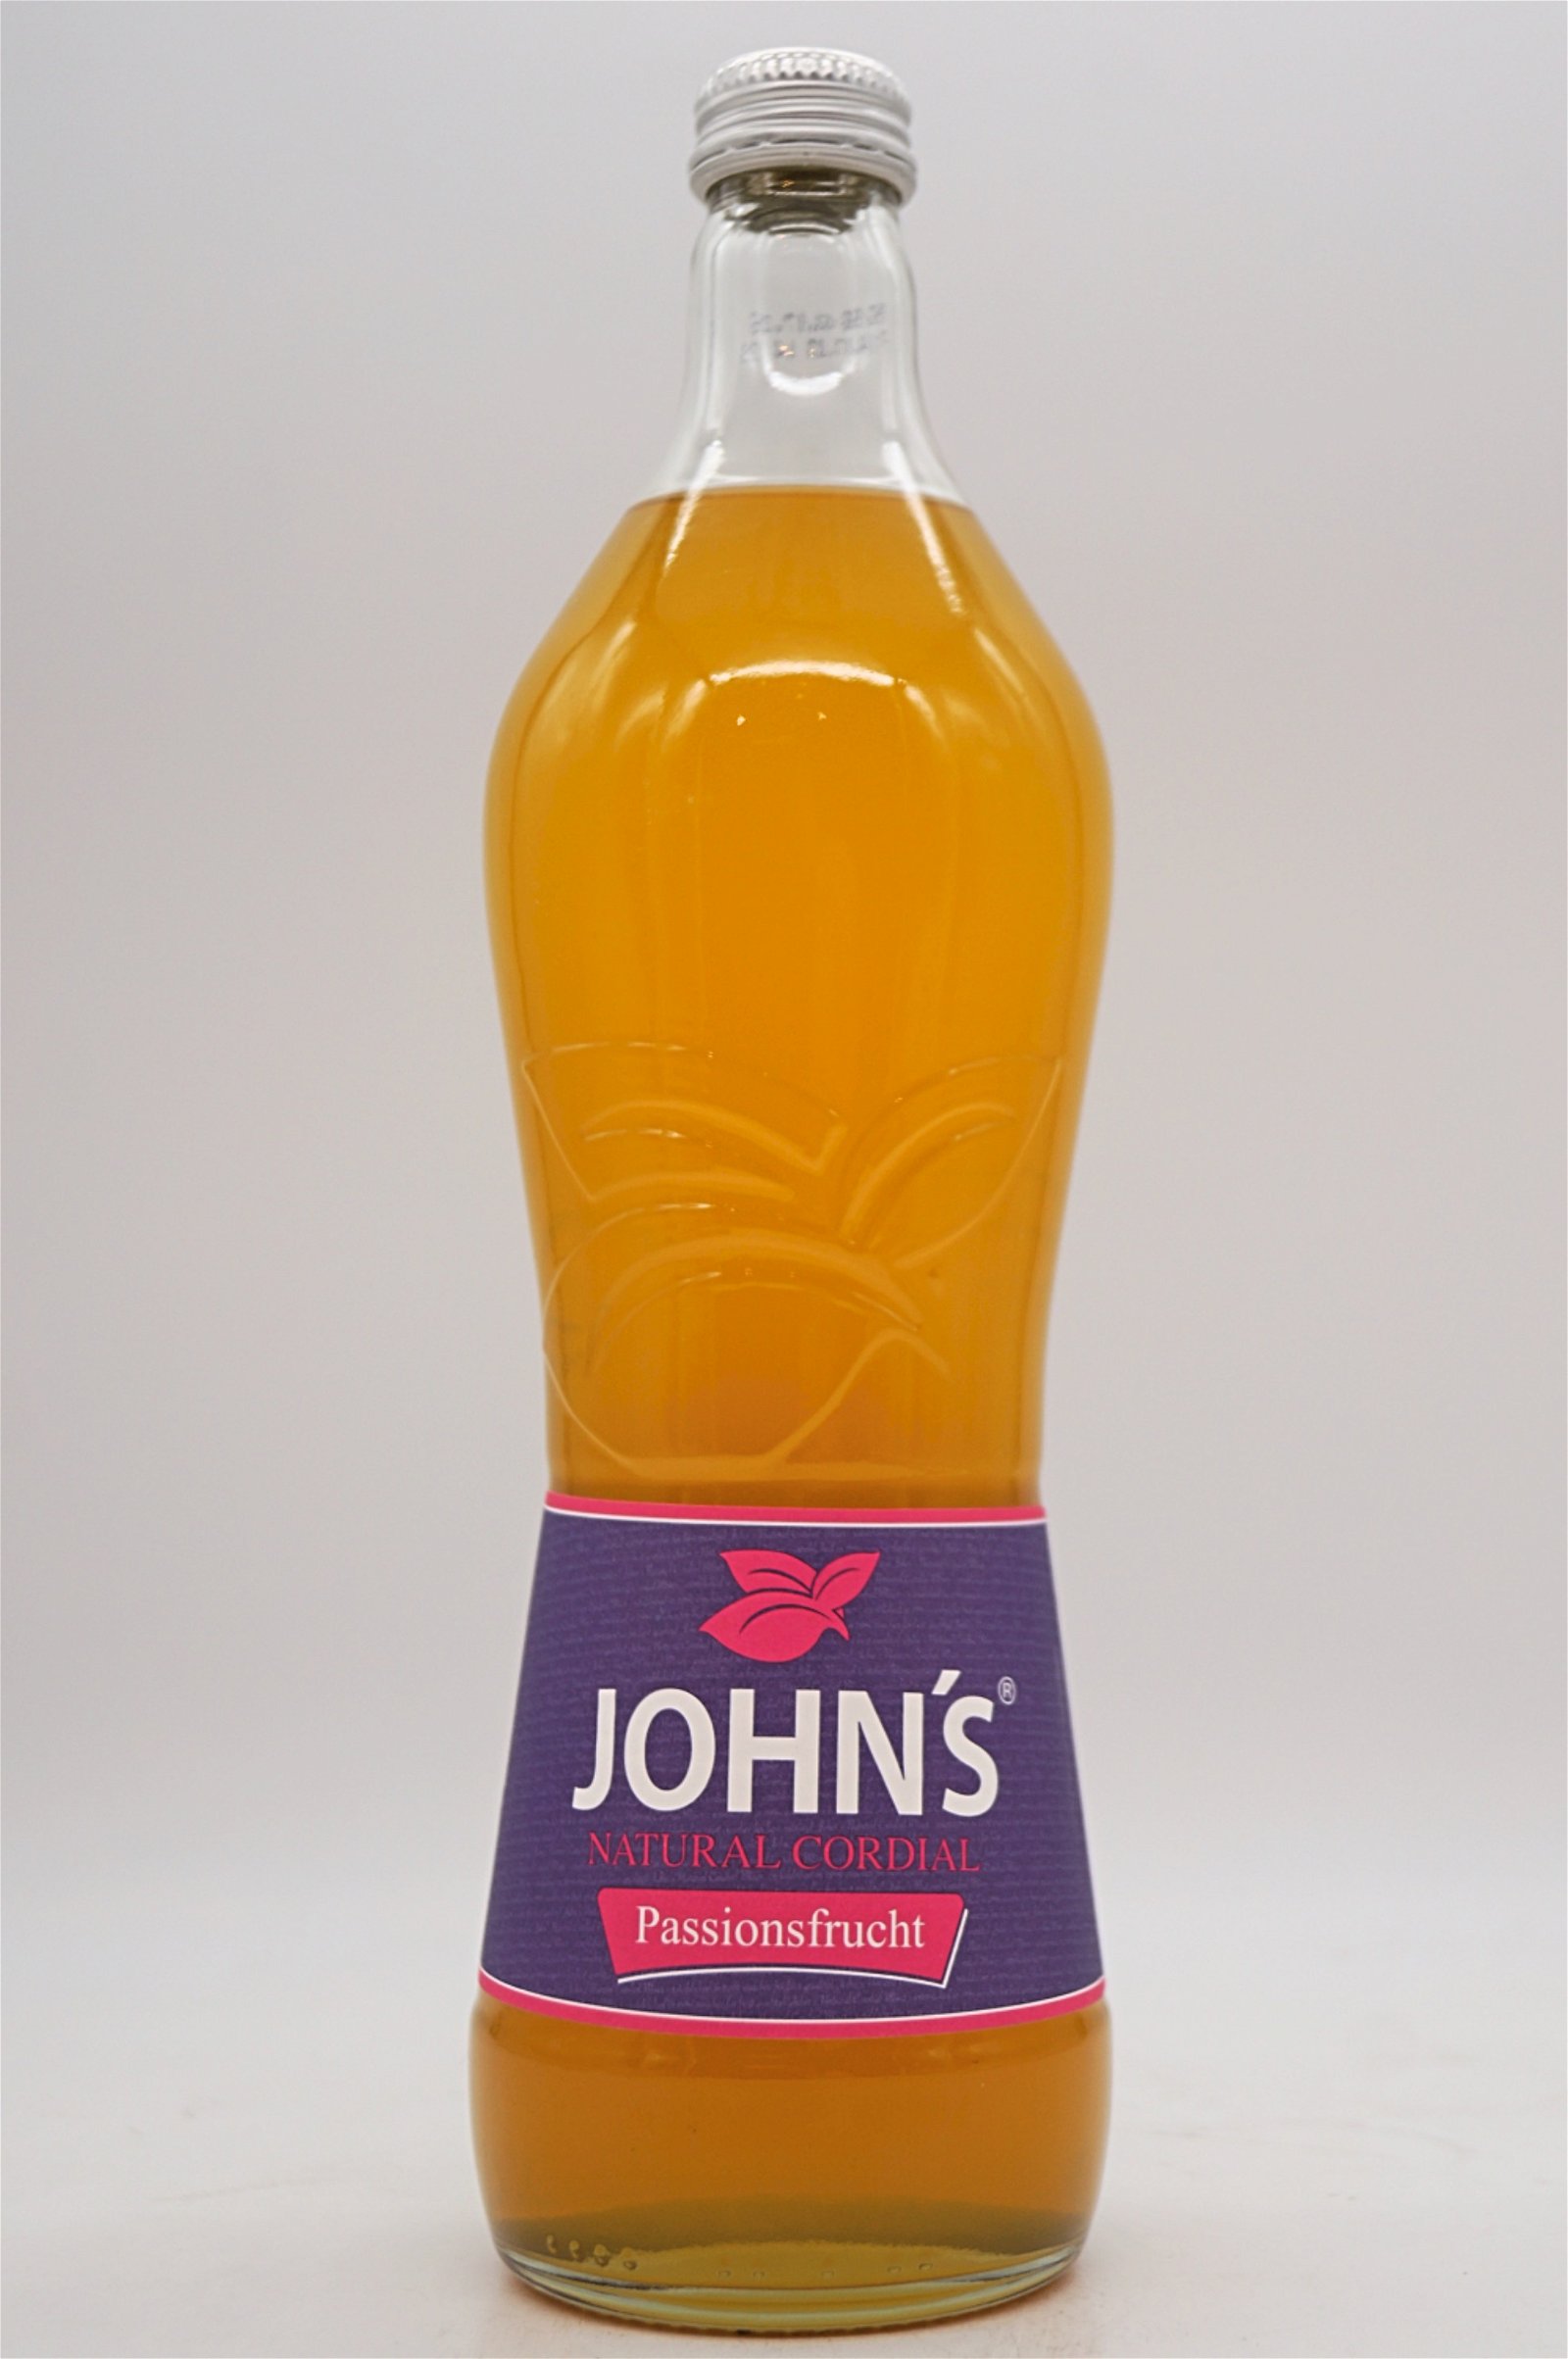 Johns Passionsfrucht Sirup